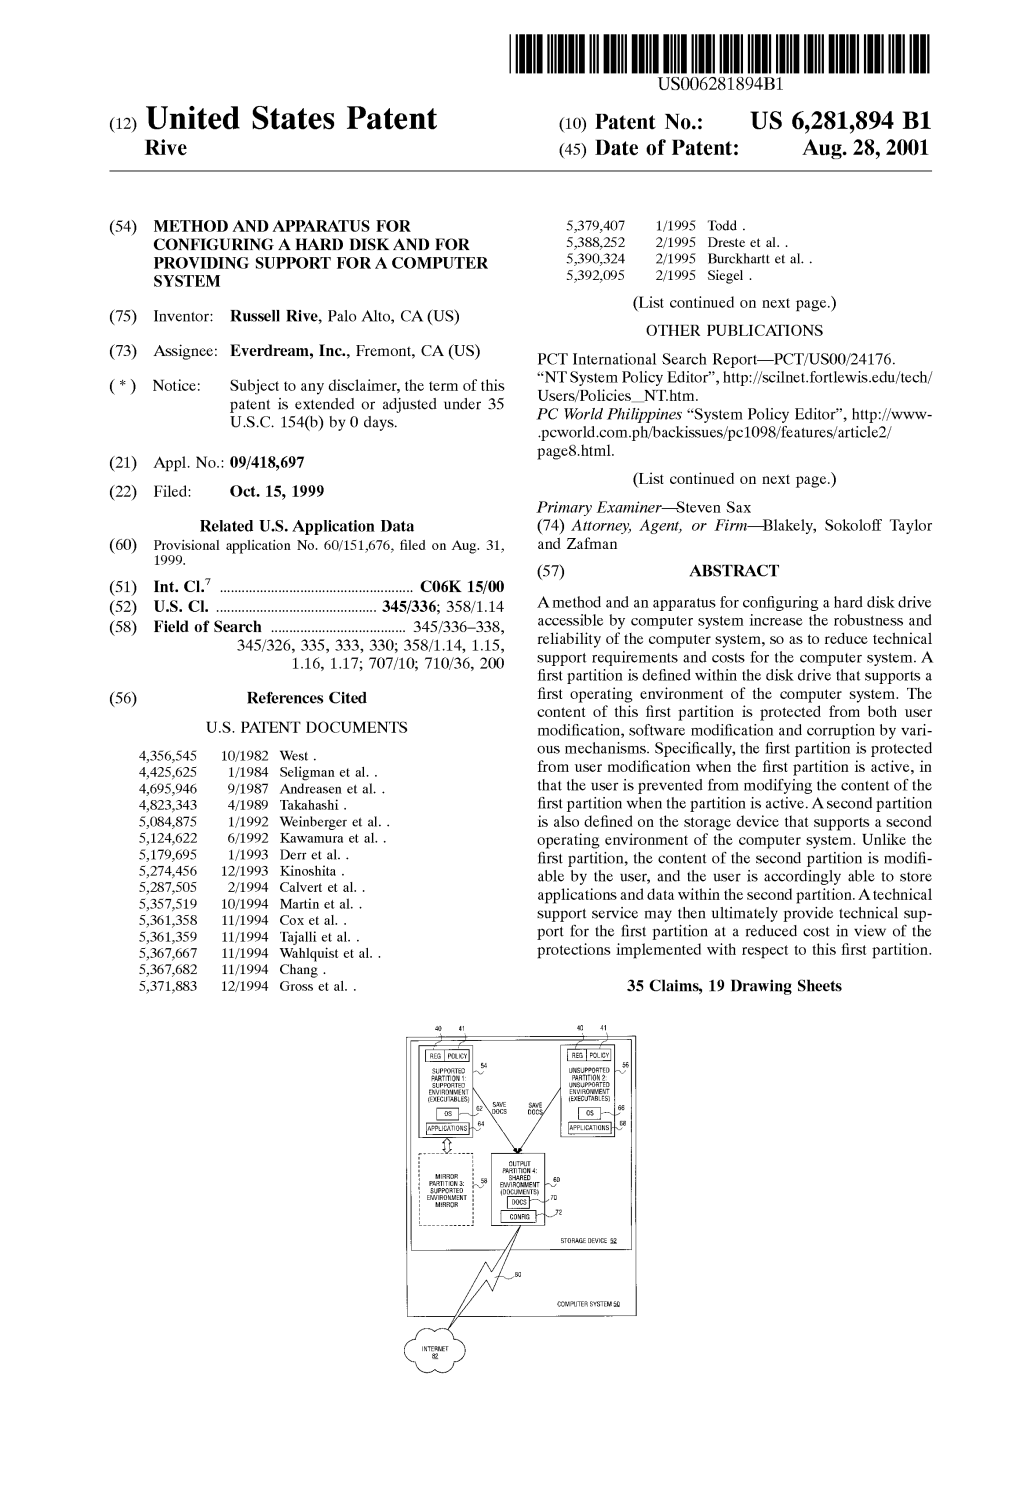 (12) United States Patent (10) Patent No.: US 6,281,894 B1 Rive (45) Date of Patent: Aug